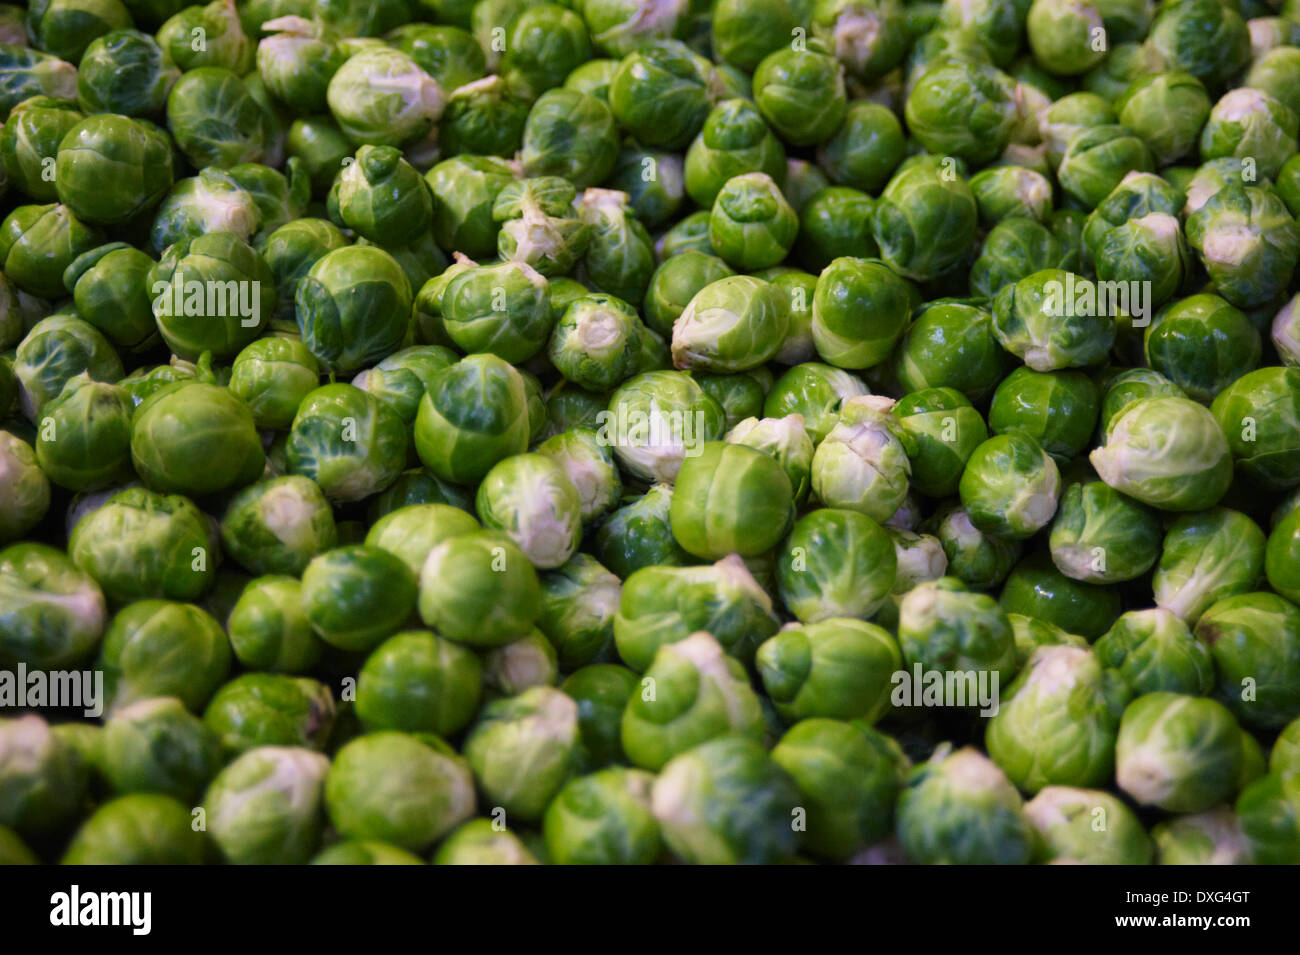 Full Frame Of Harvested Brussel Sprouts Stock Photo